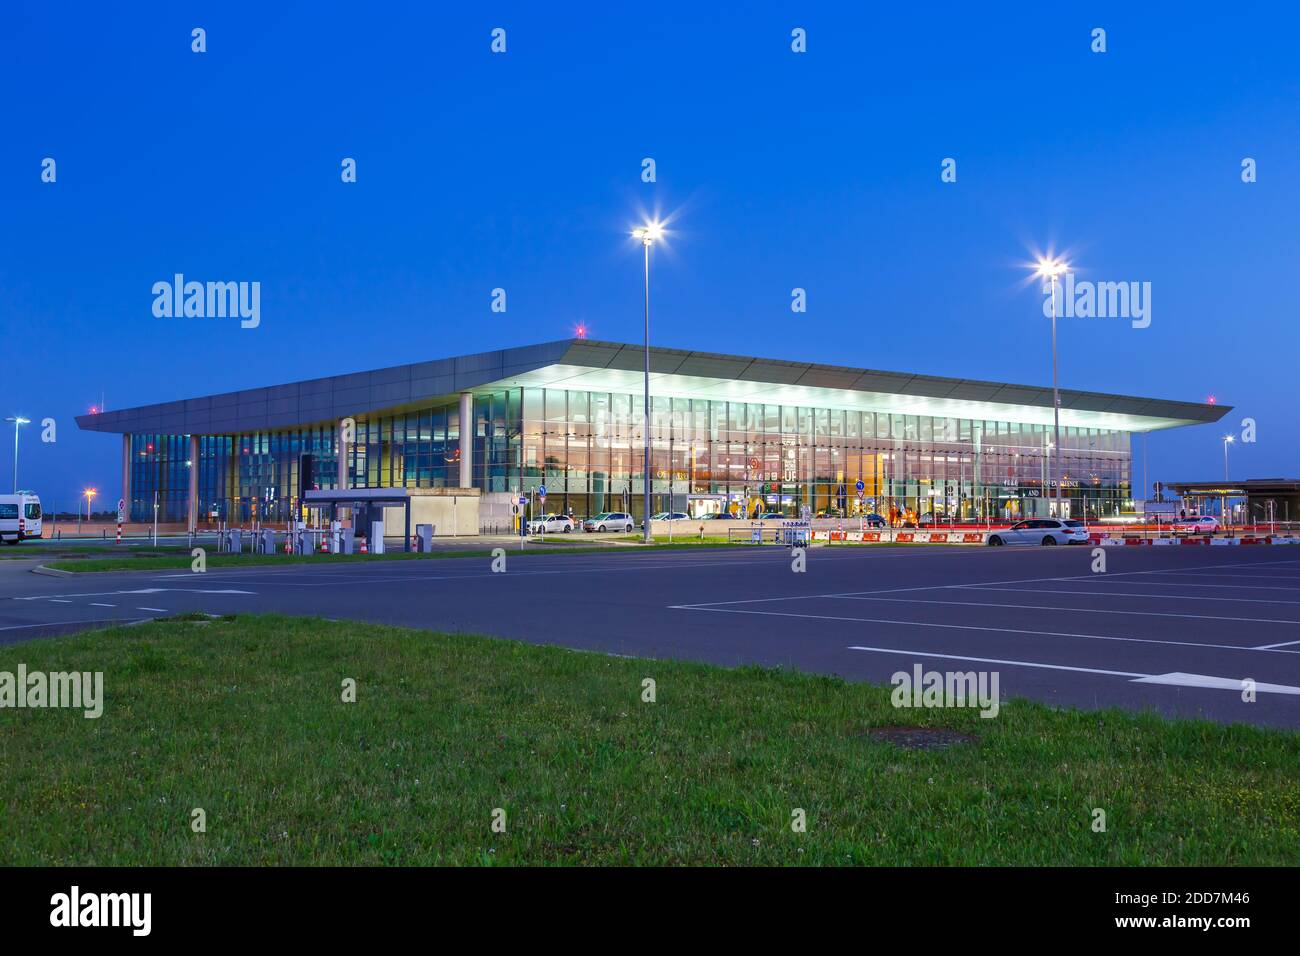 Luxemburg, Luxembourg - June 23, 2020: Terminal building of Luxemburg Airport in Luxembourg. Stock Photo